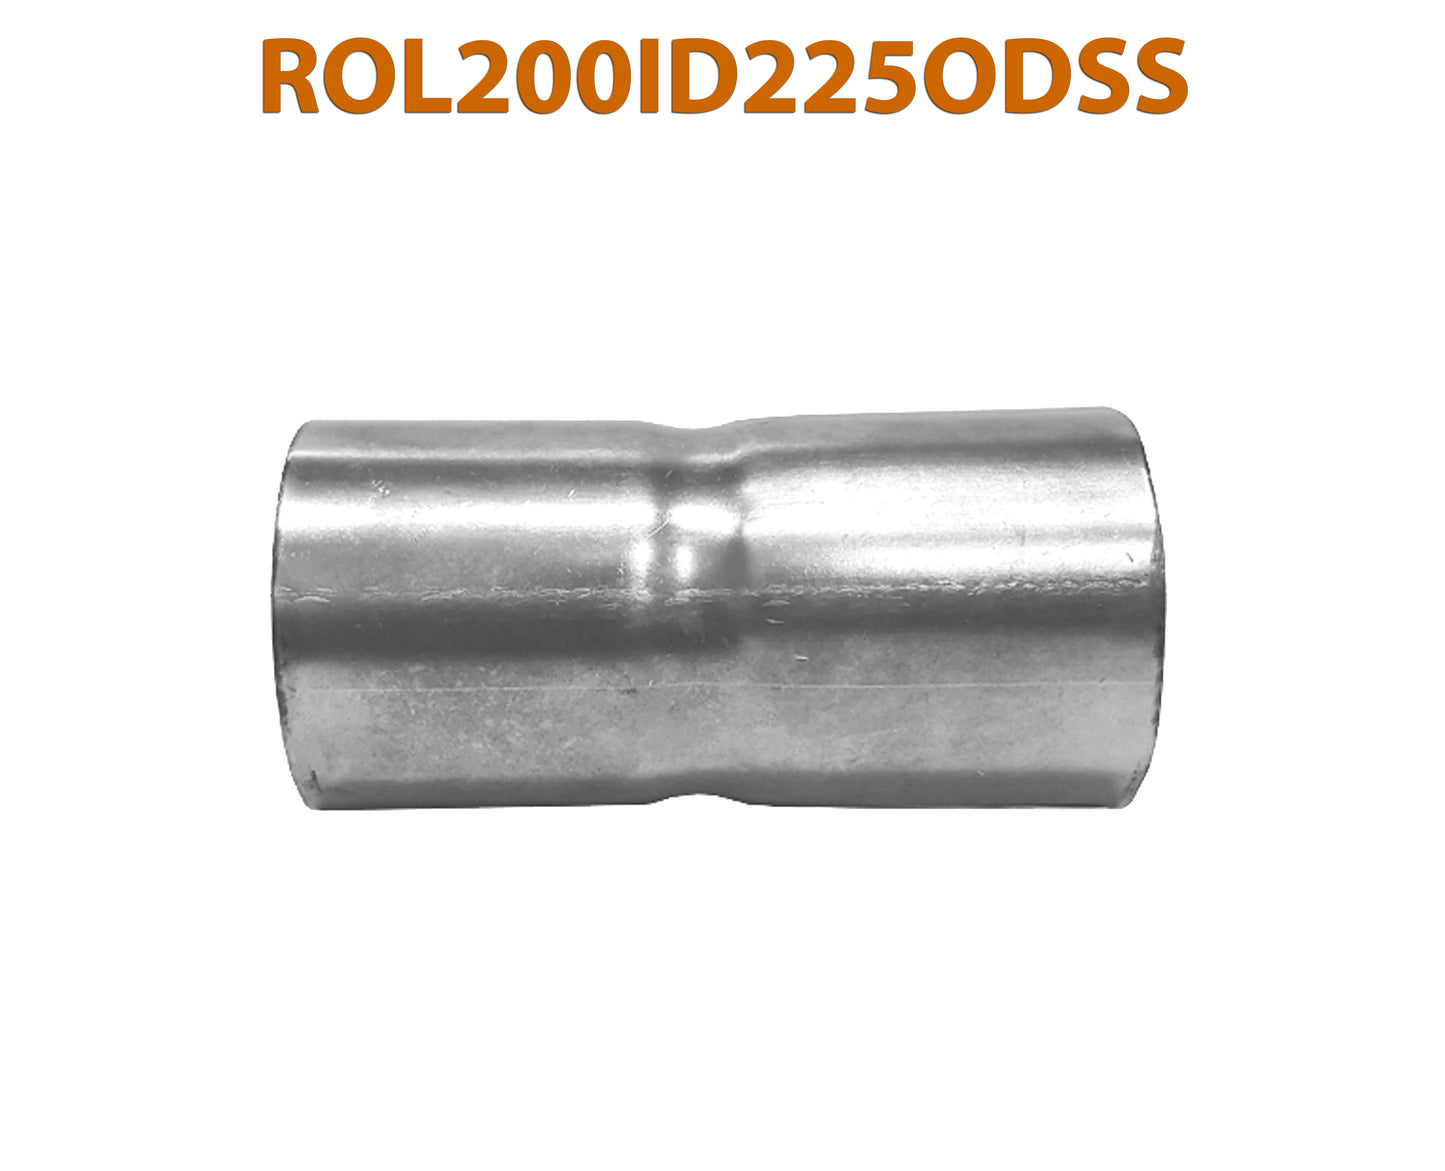 ROL200ID225ODSS 648222 2” ID to 2 1/4” OD Stainless Steel Exhaust Pipe to Component Adapter Reducer